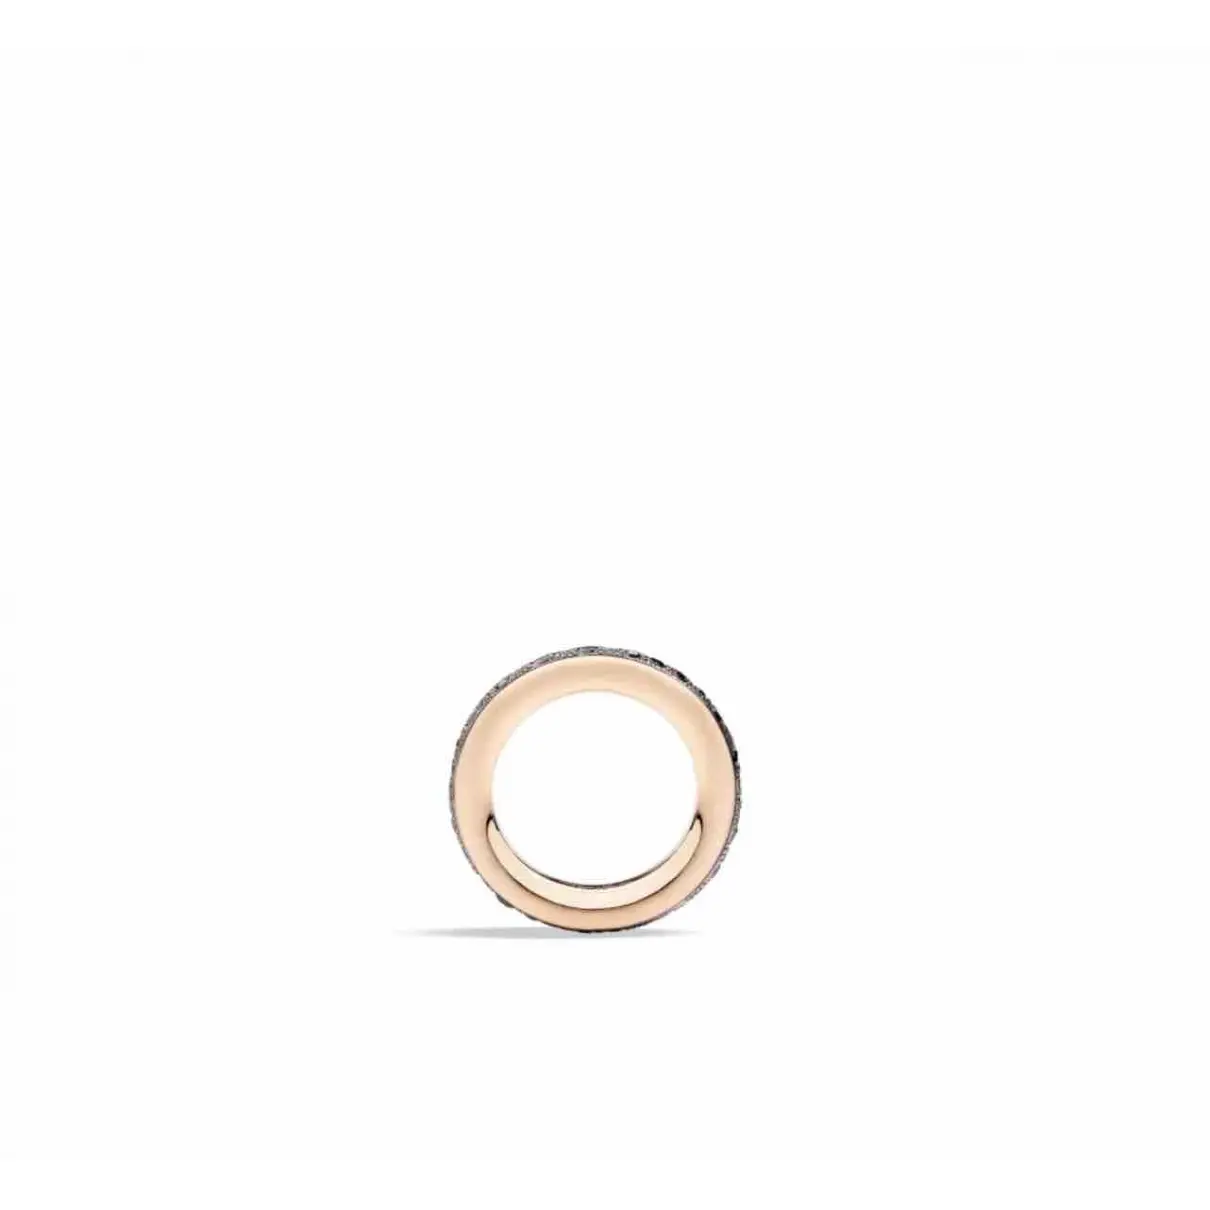 Buy Pomellato Iconica pink gold ring online